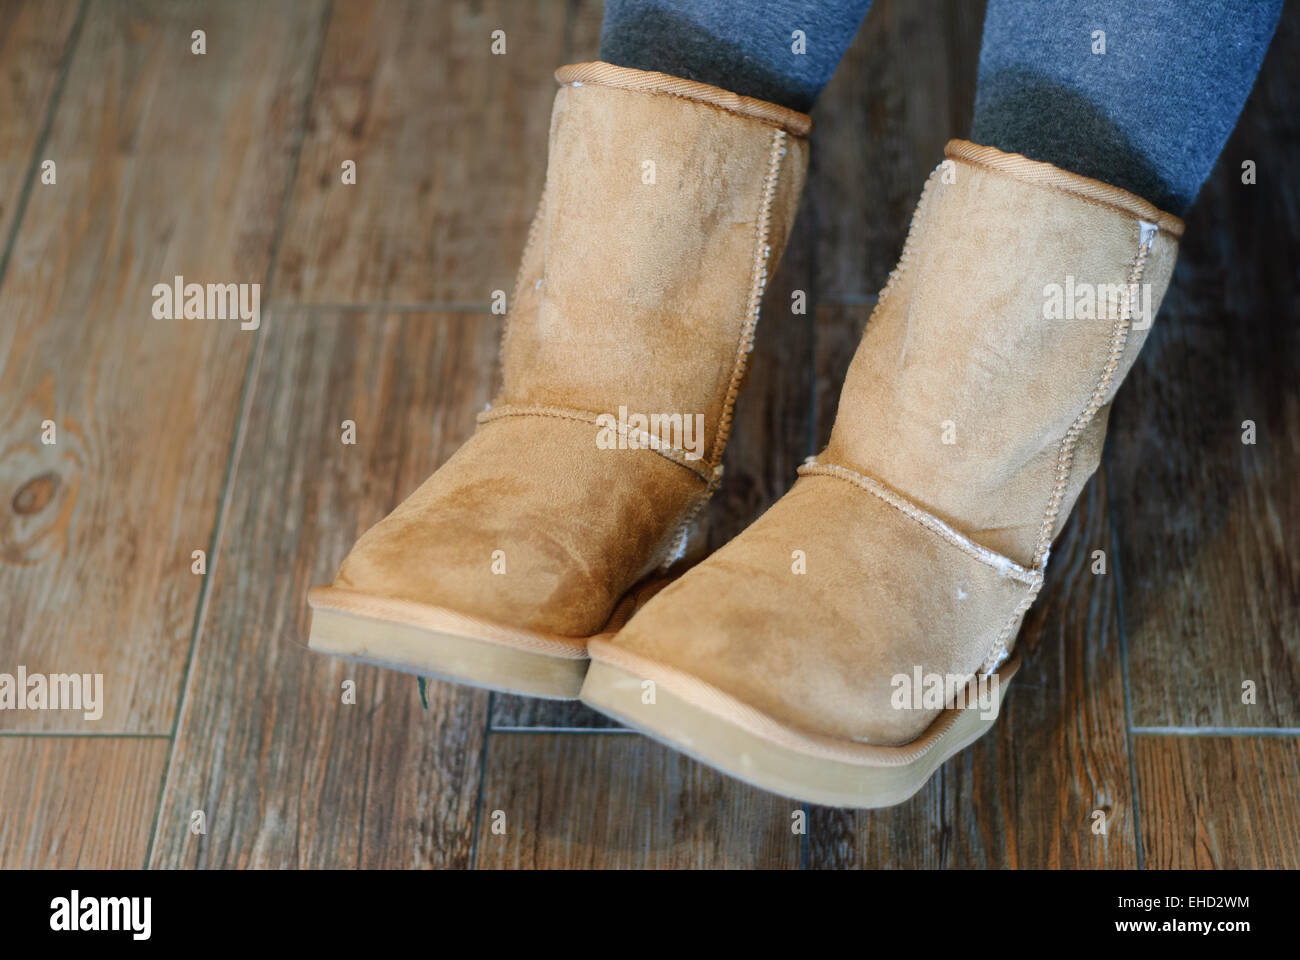 boots stock photography images - Alamy